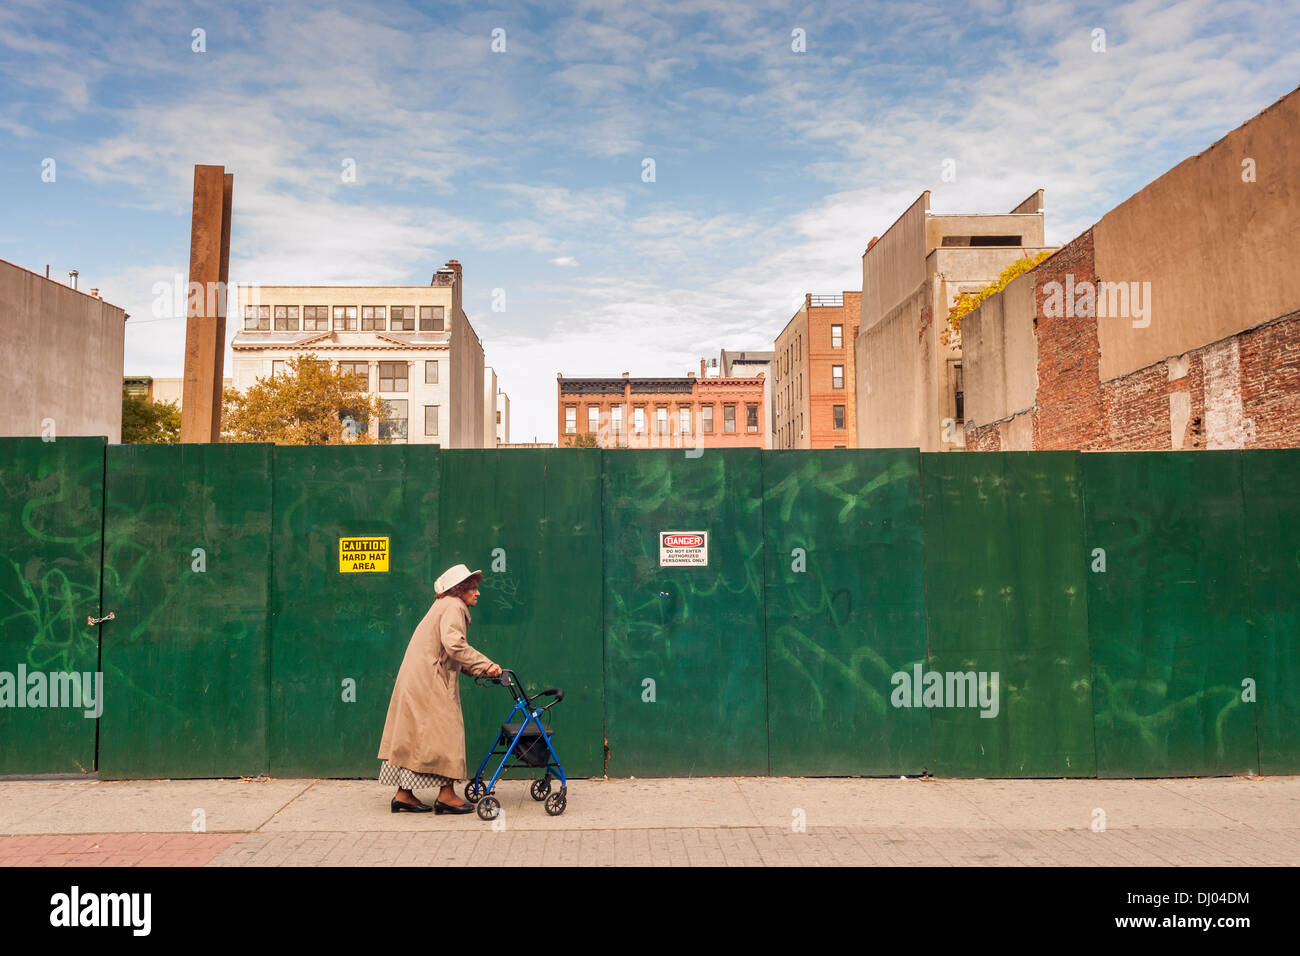 Site of future retail development on West 125th Street in Harlem in New York seen on Sunday, November 3, 2013. Stock Photo